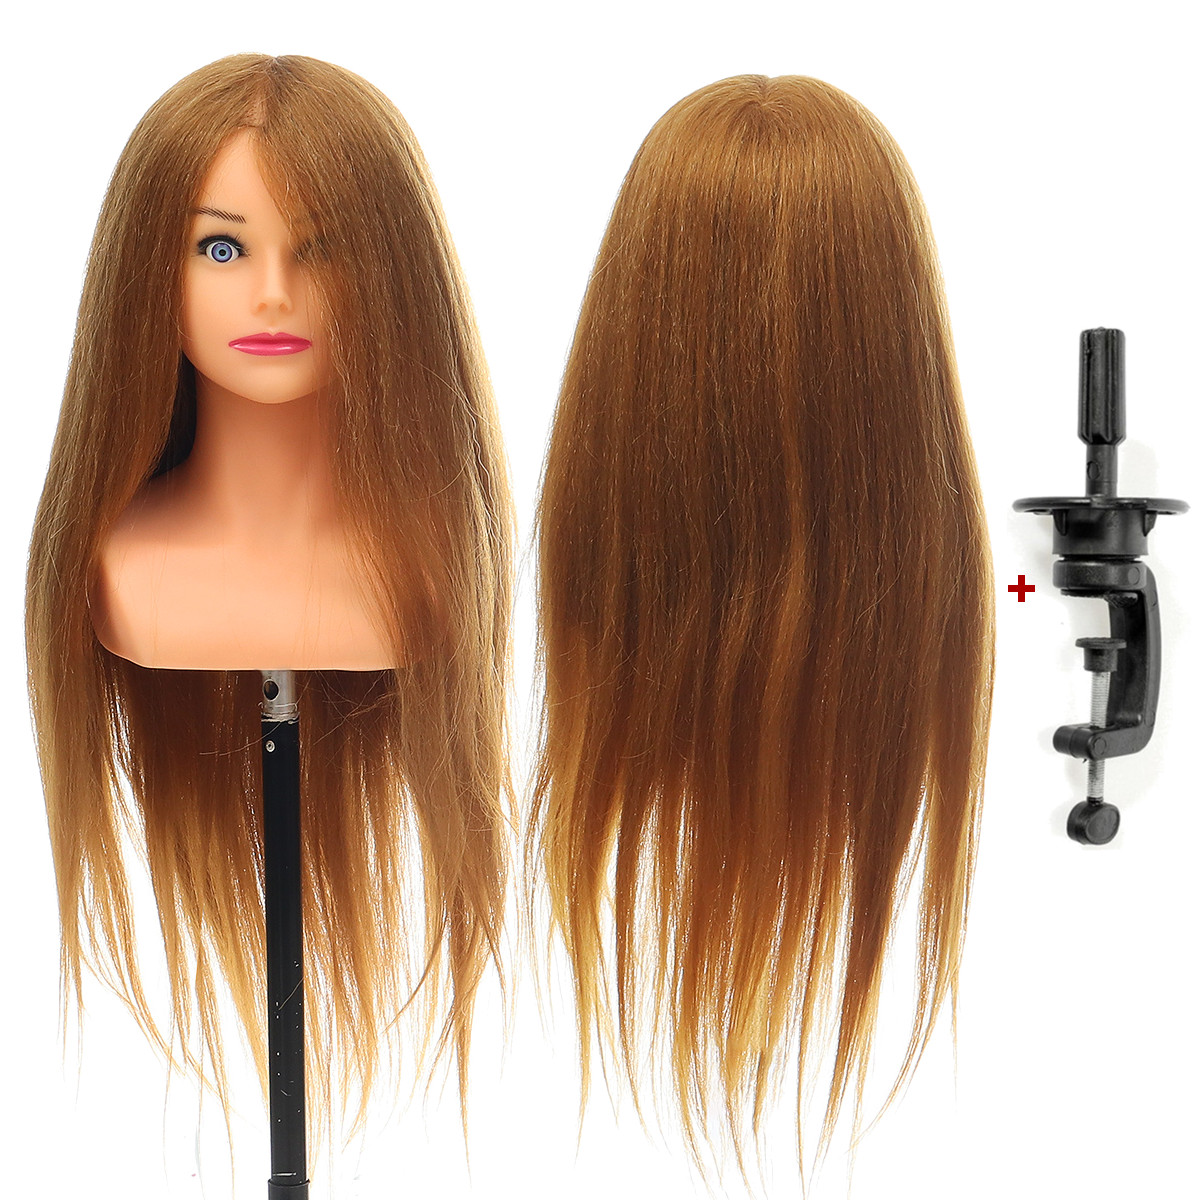 hair mannequin stand